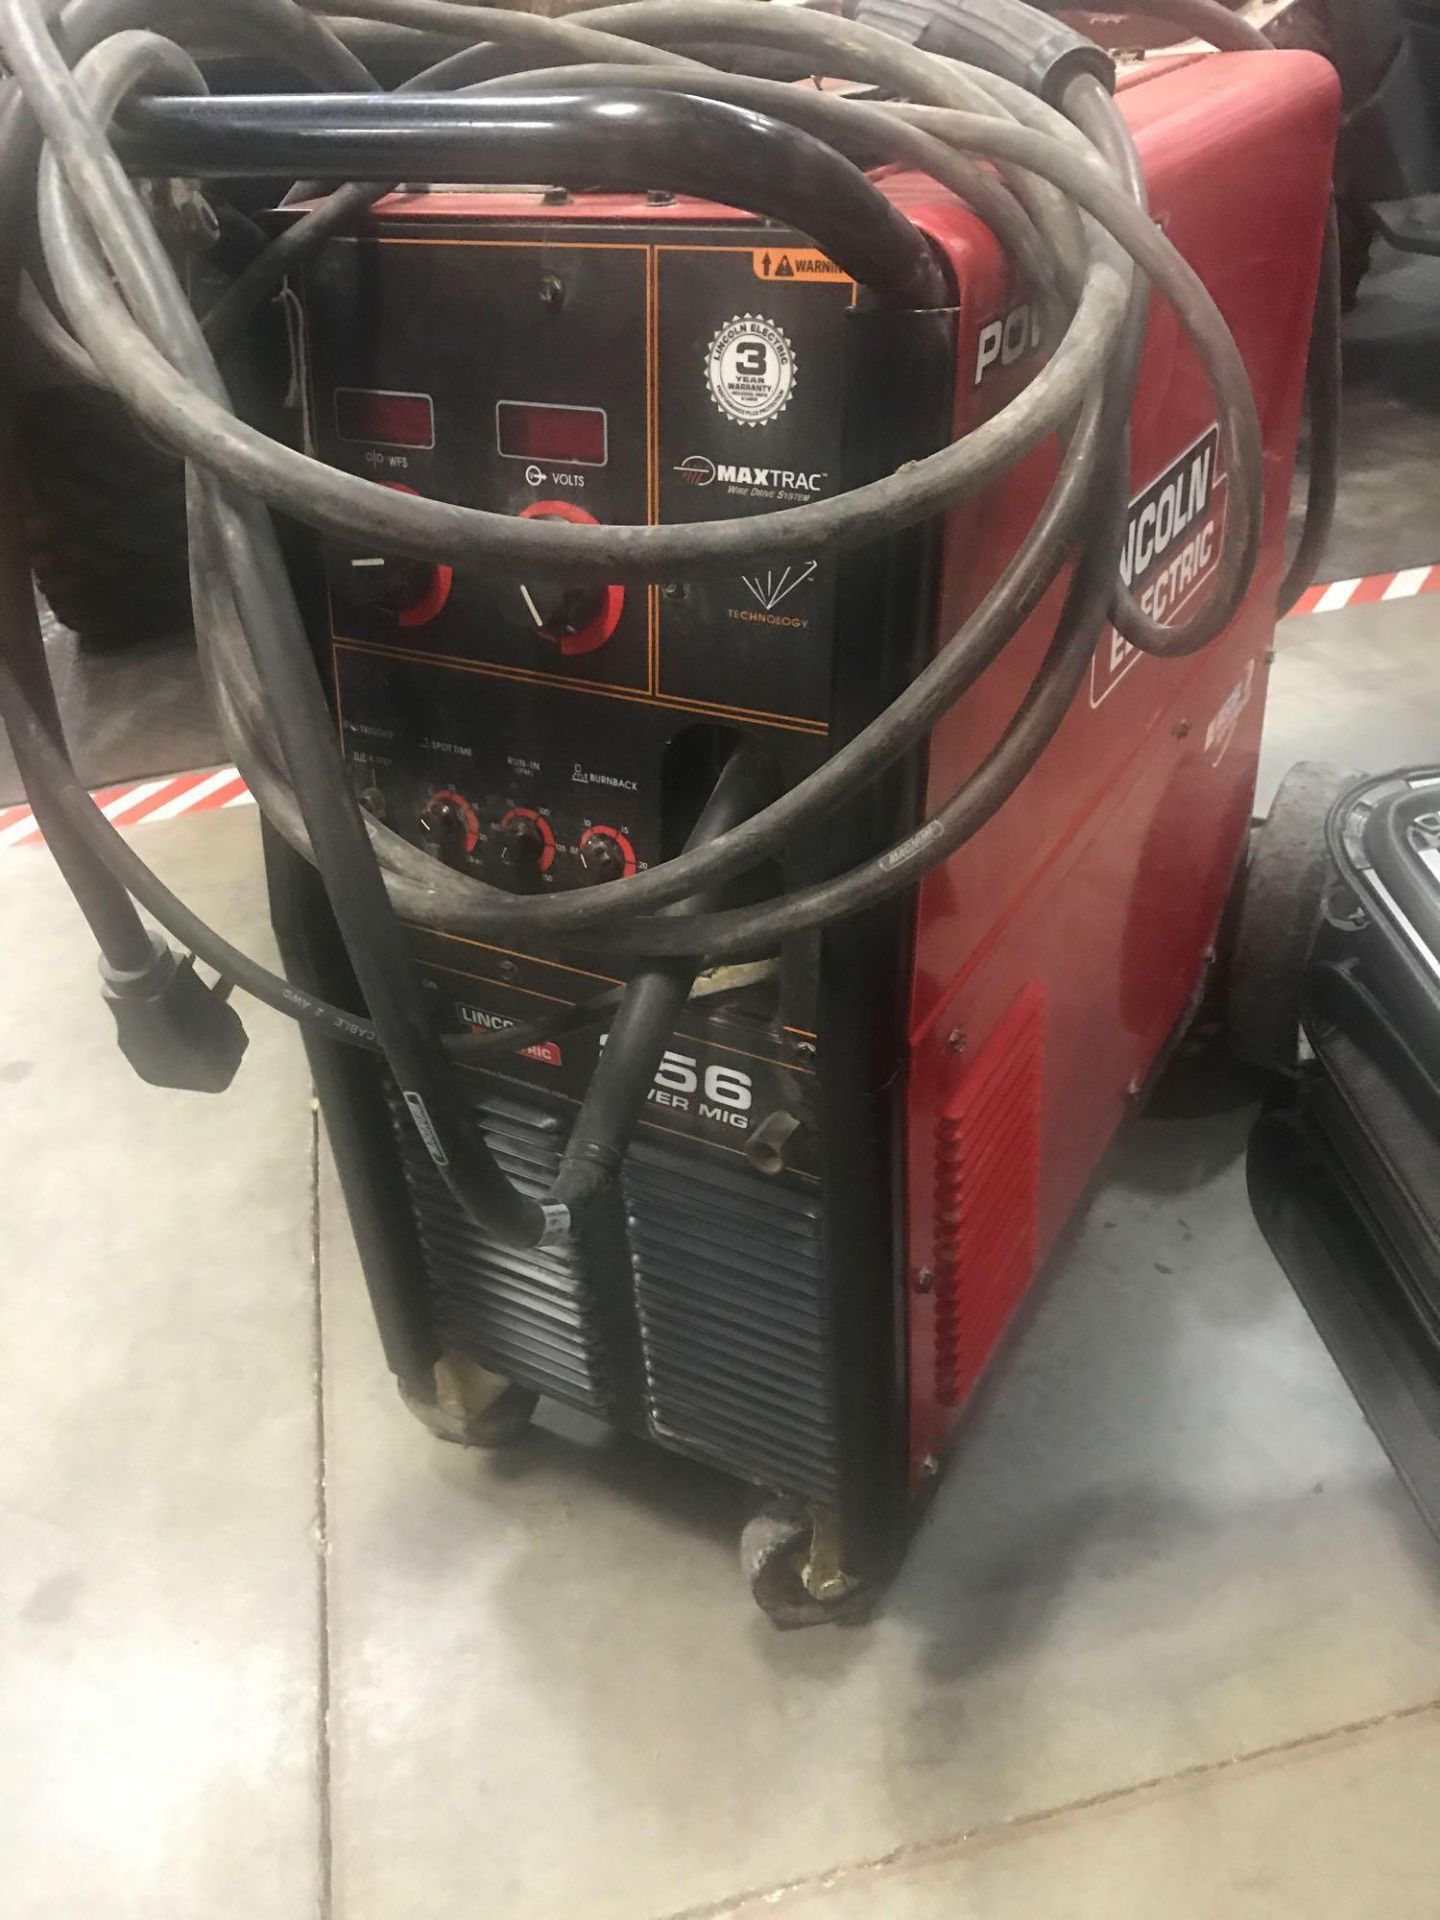 LINCOLN ELECTRIC 256 POWER MIG WELDER, DIAMOND CARE TECHNOLOGY & MAXTRAC DRIVE SYSTEM - Image 2 of 4